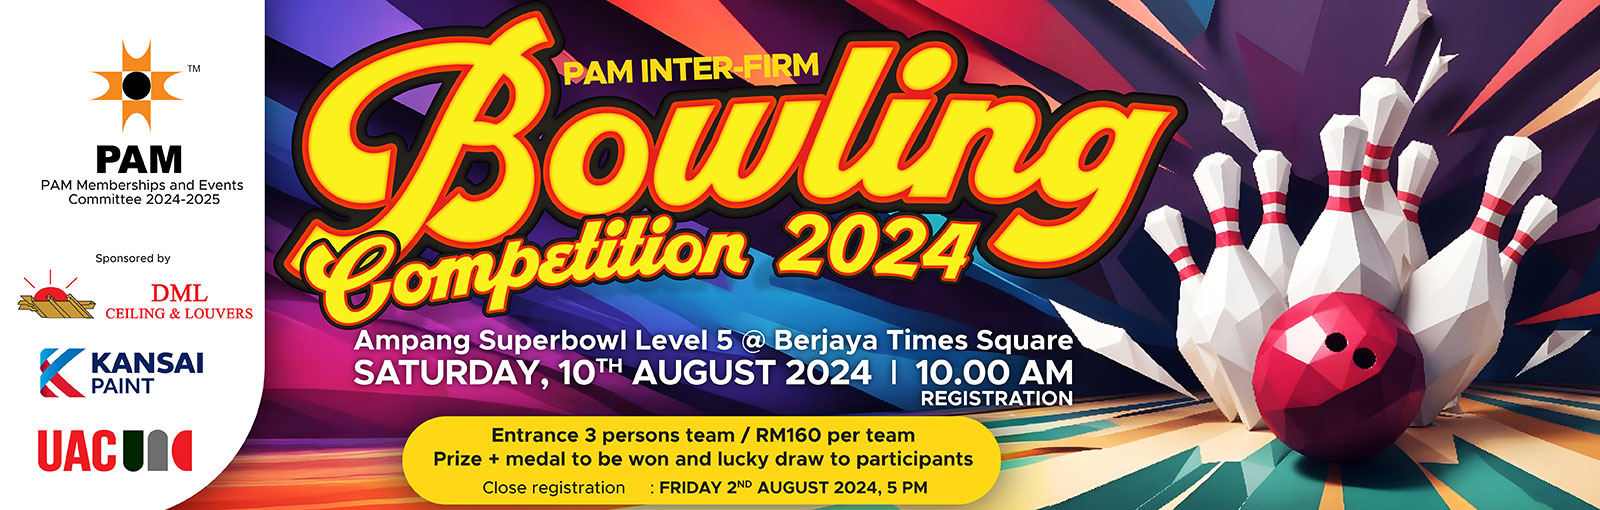 PAM Inter-Firm Bowling Competition 2024